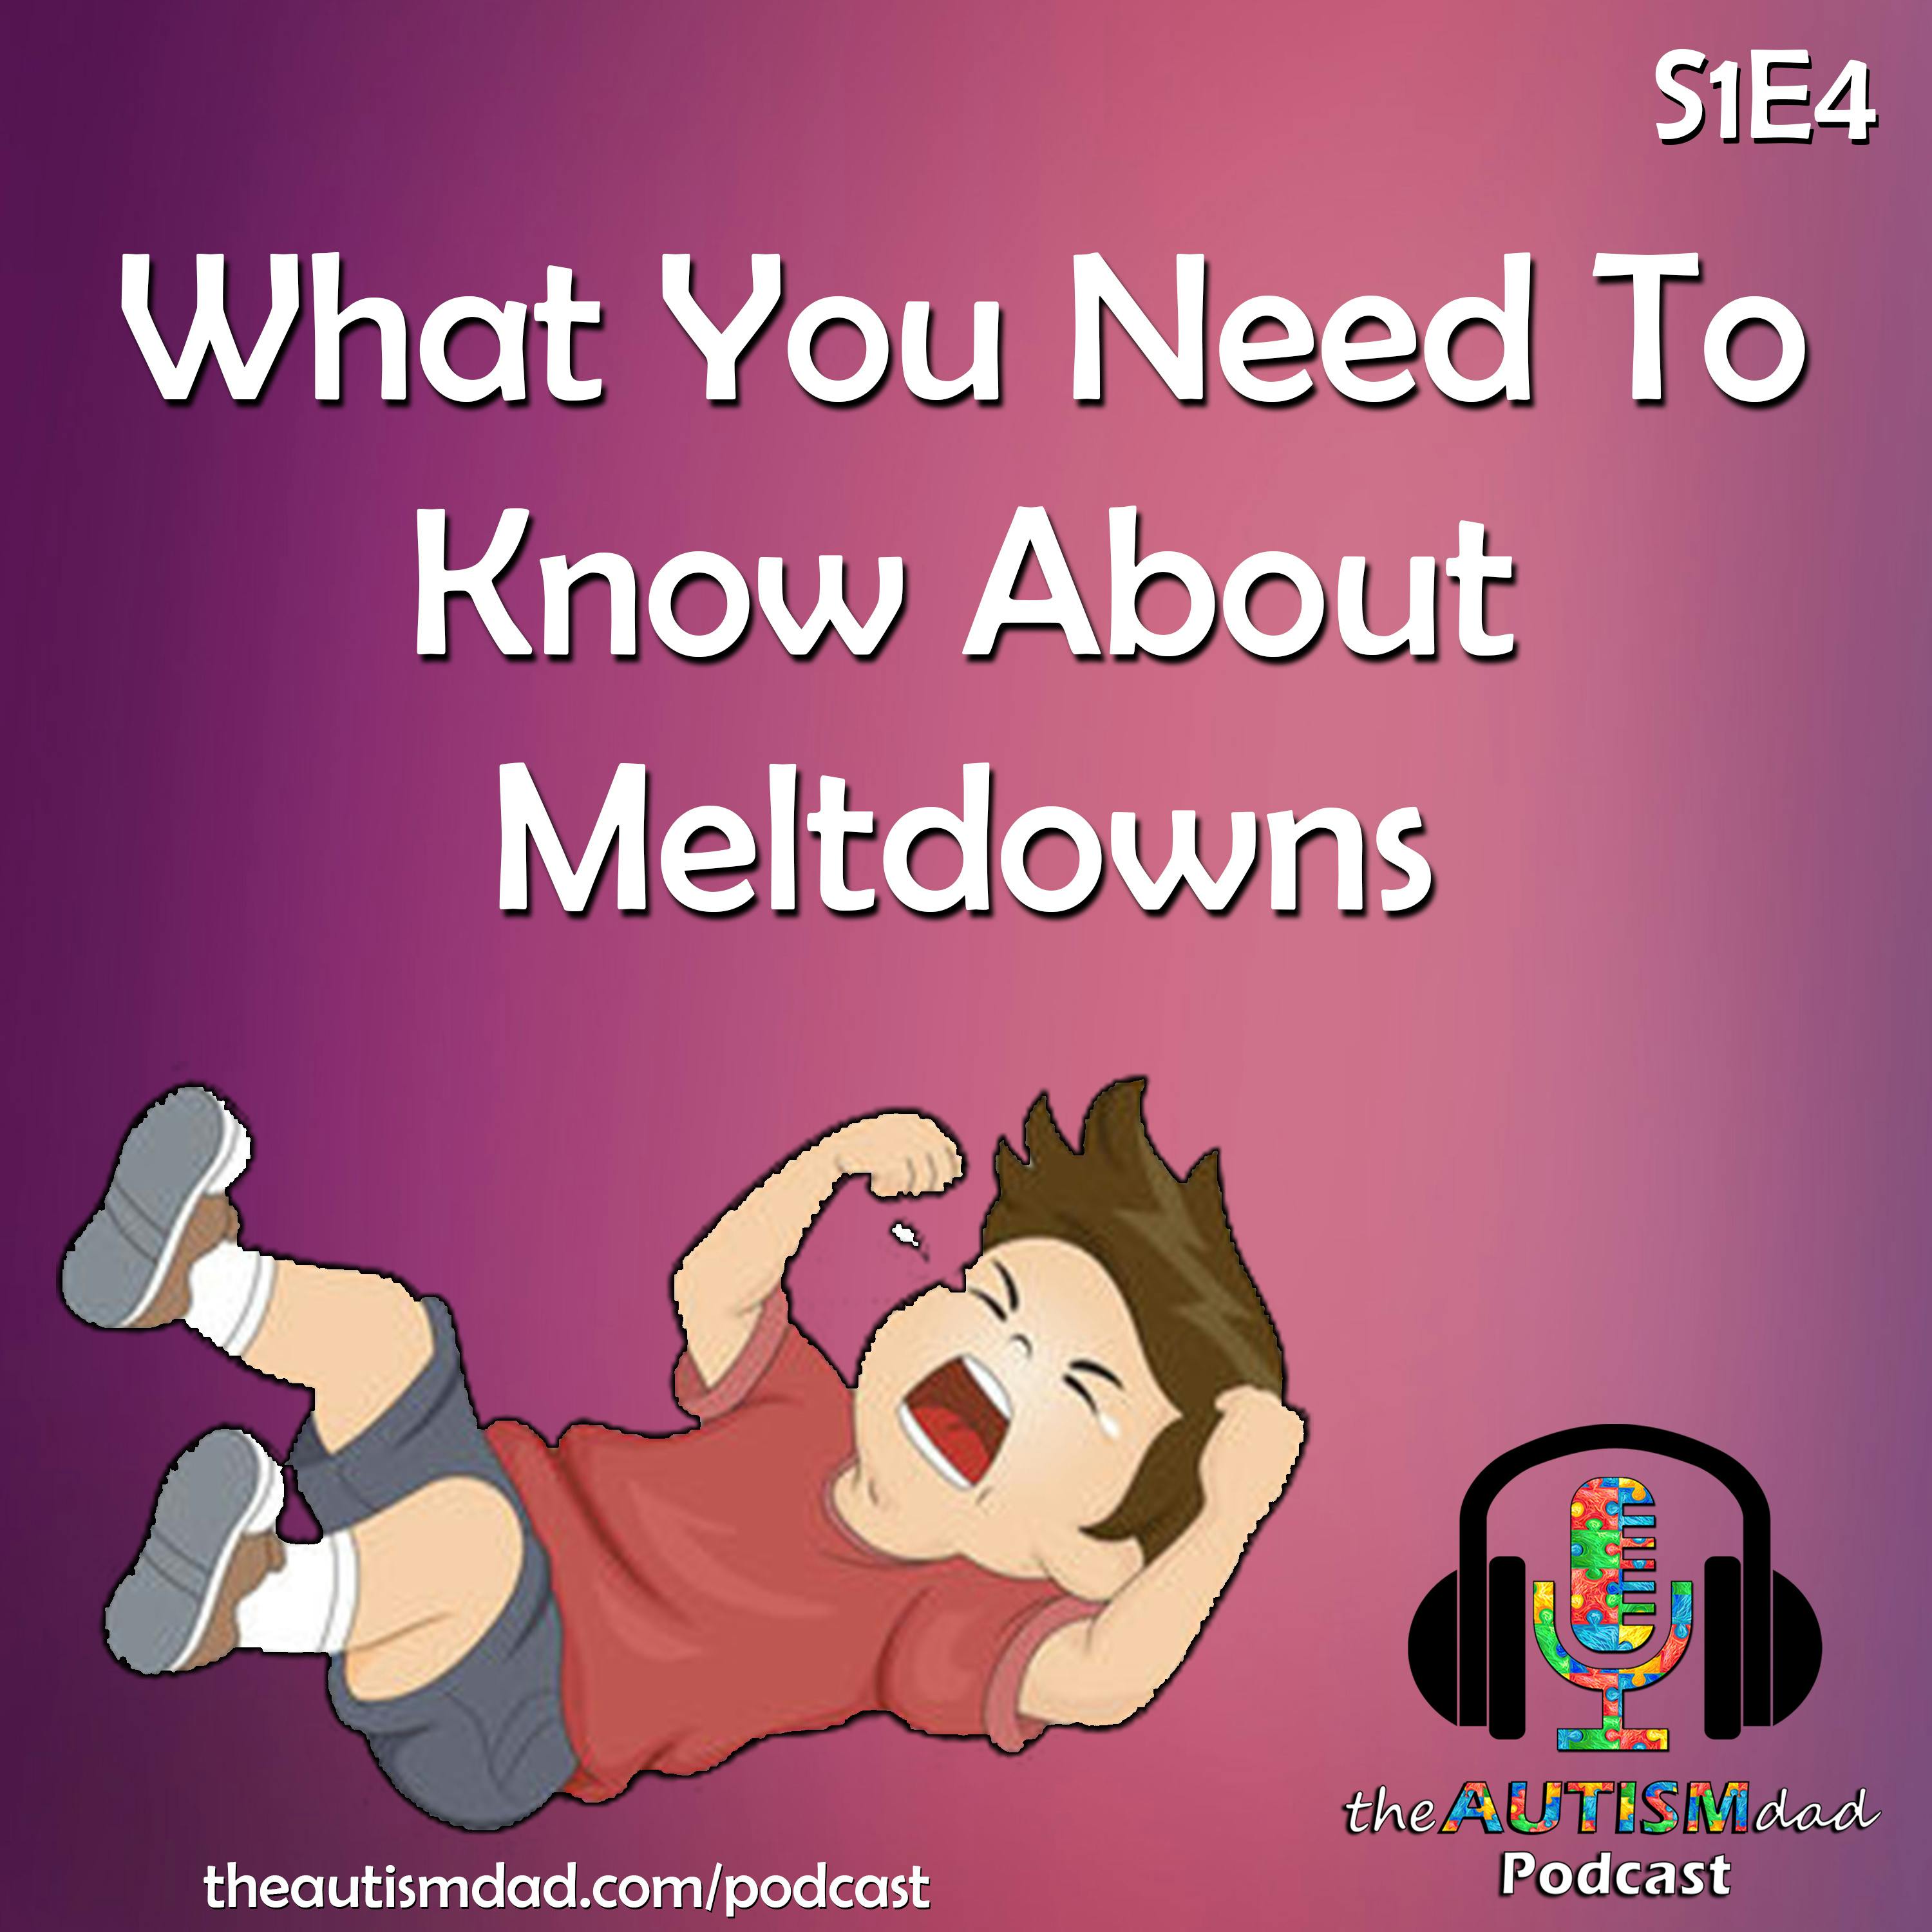 What You Need To Know About Meltdowns Image